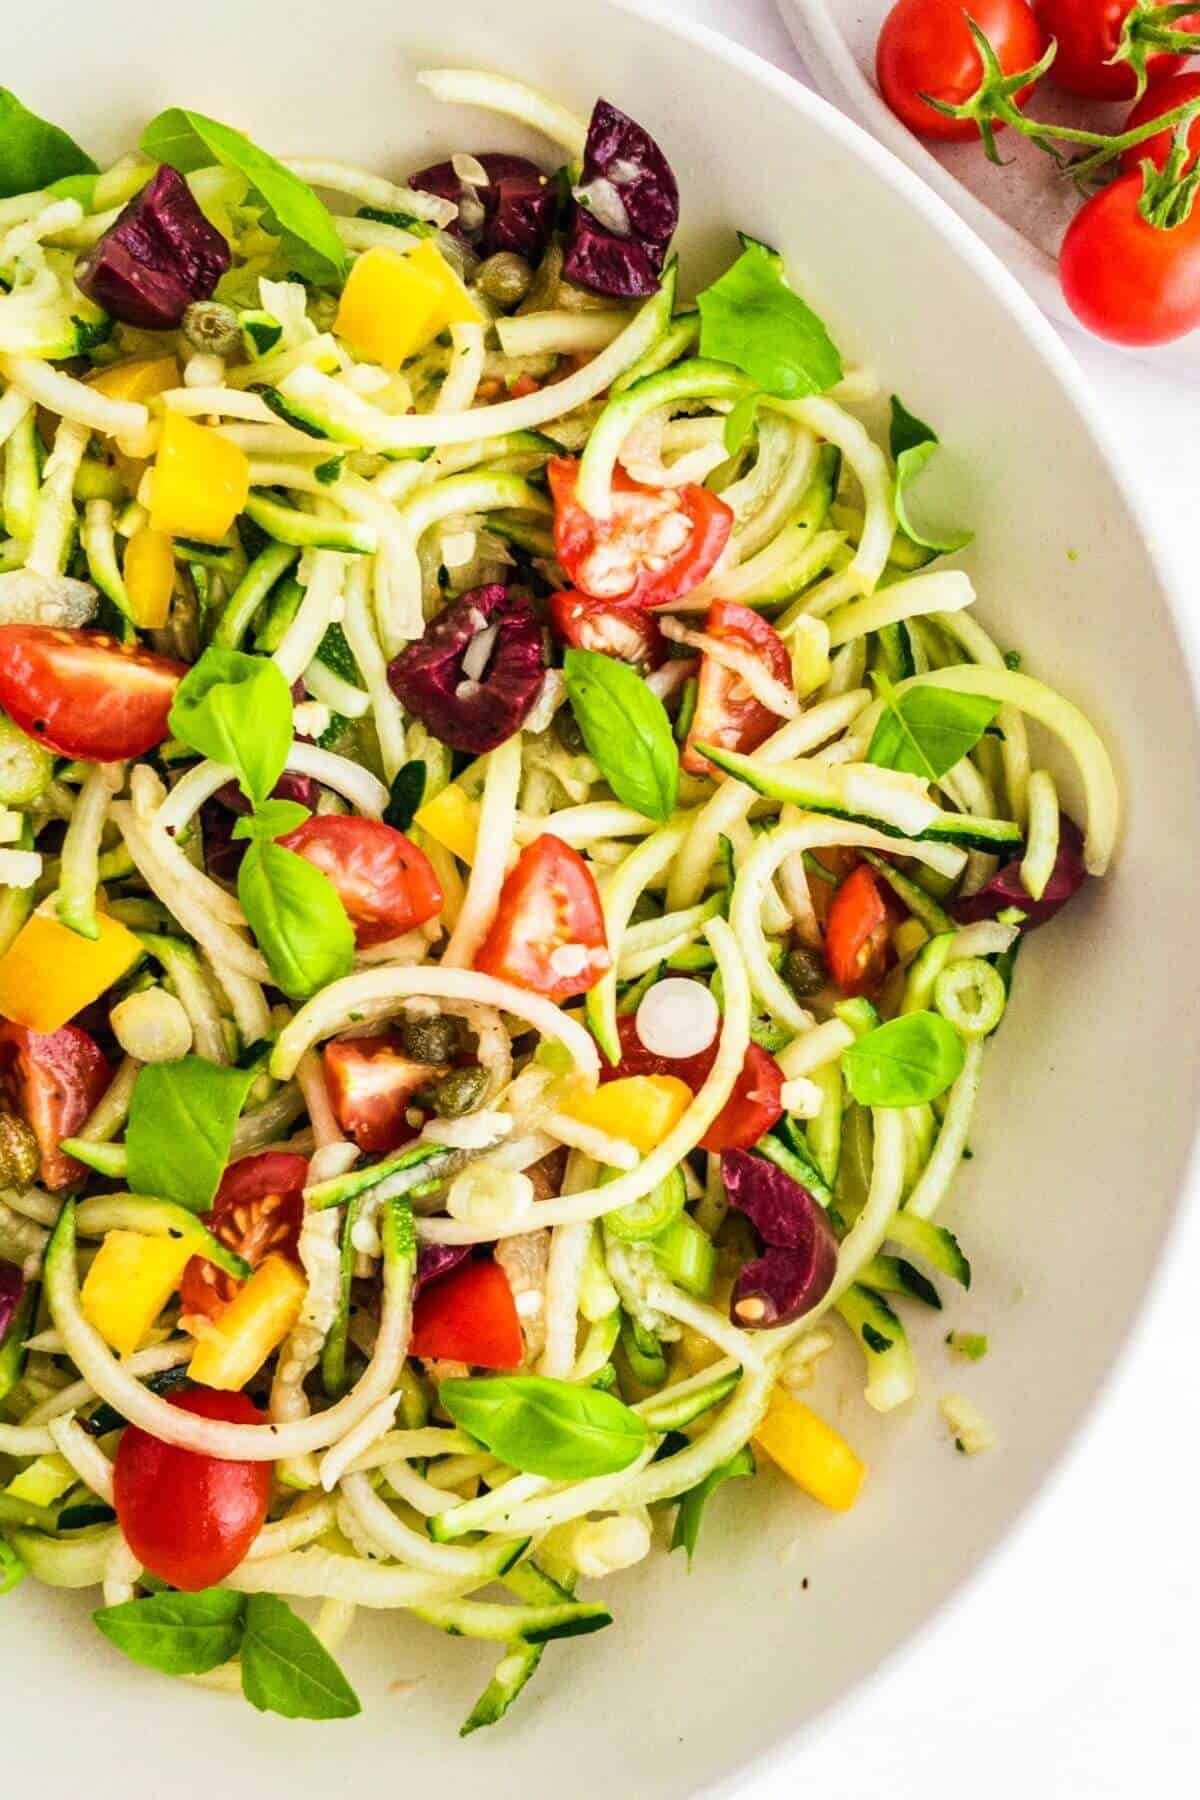 Courgetti spaghetti with vegetables, finished recipe.
